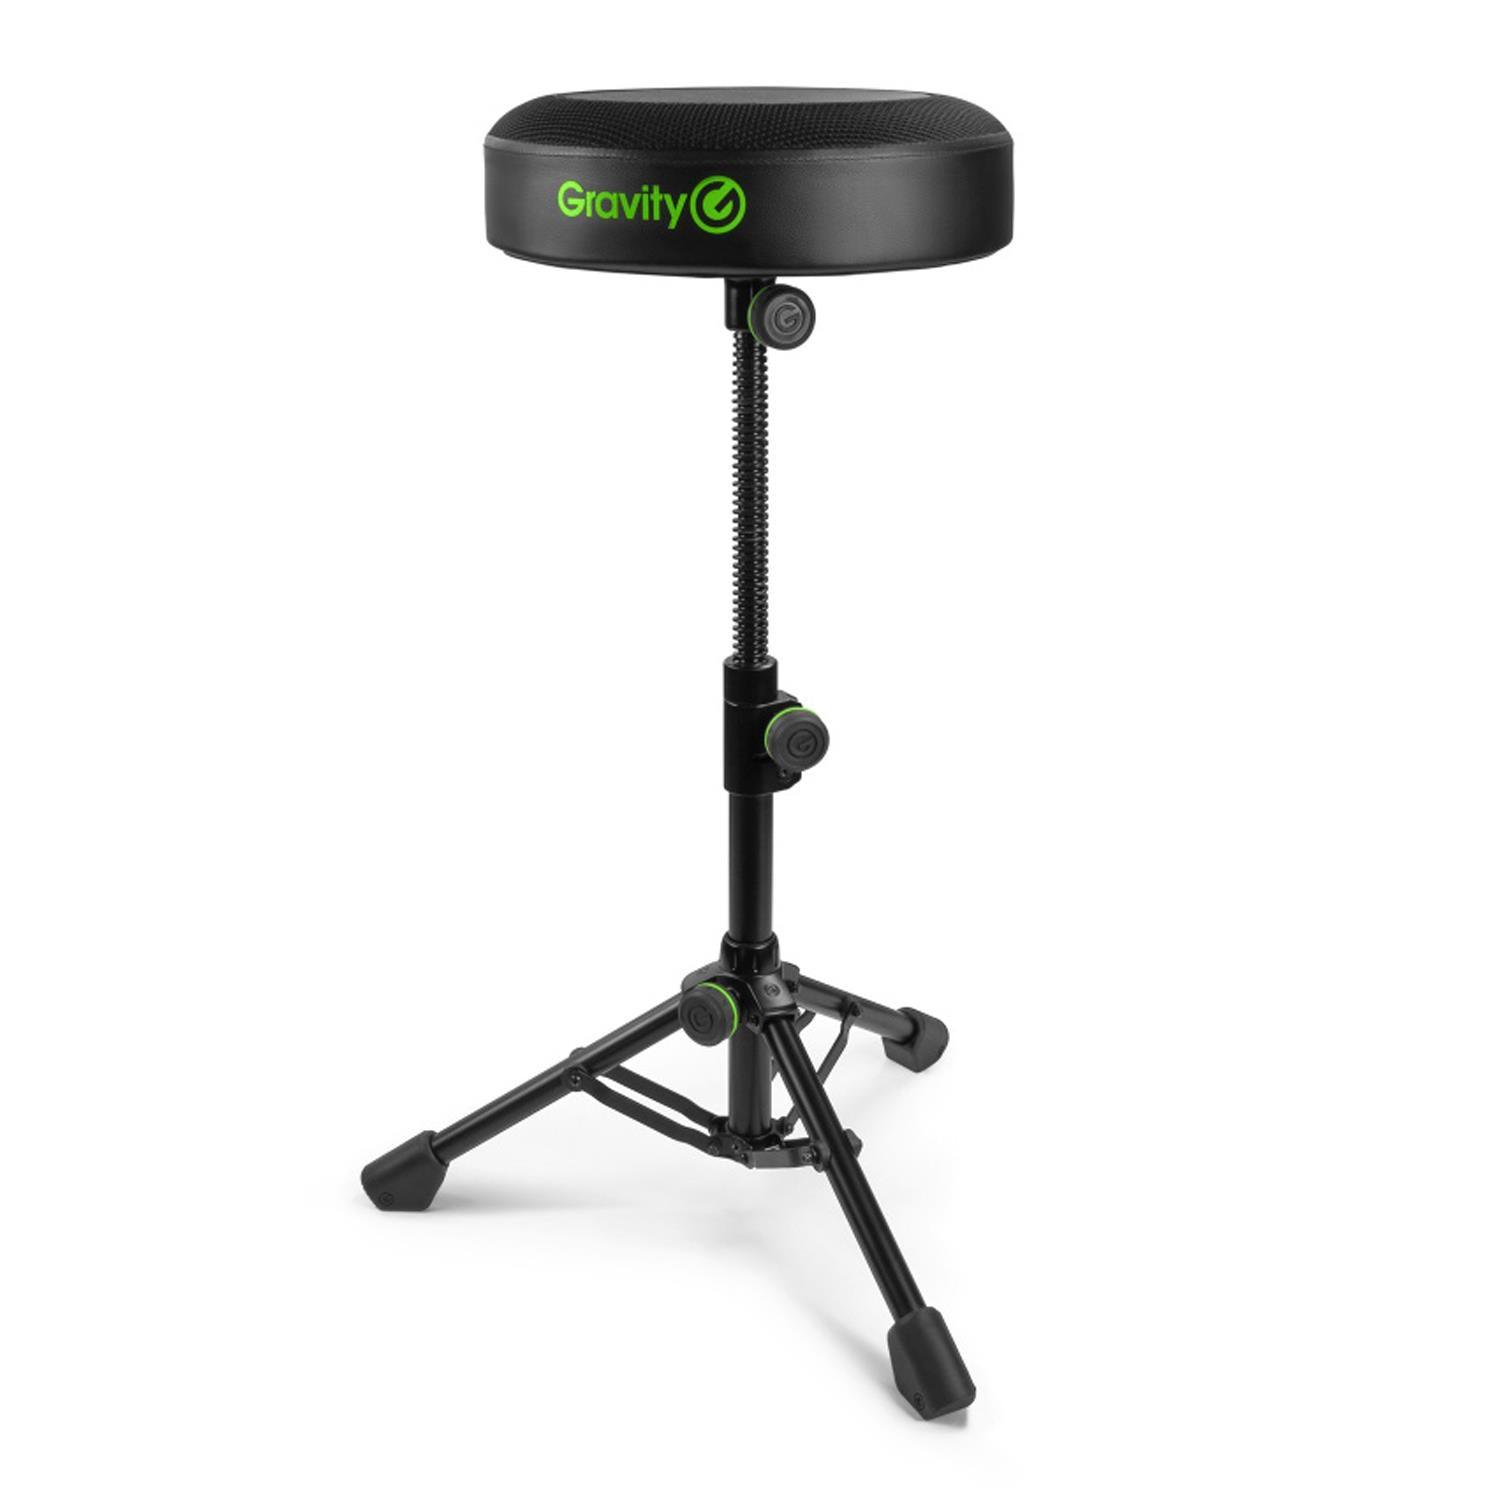 Gravity FD SEAT 1 Round Foldable Adjustable Musicians Stool - DY Pro Audio